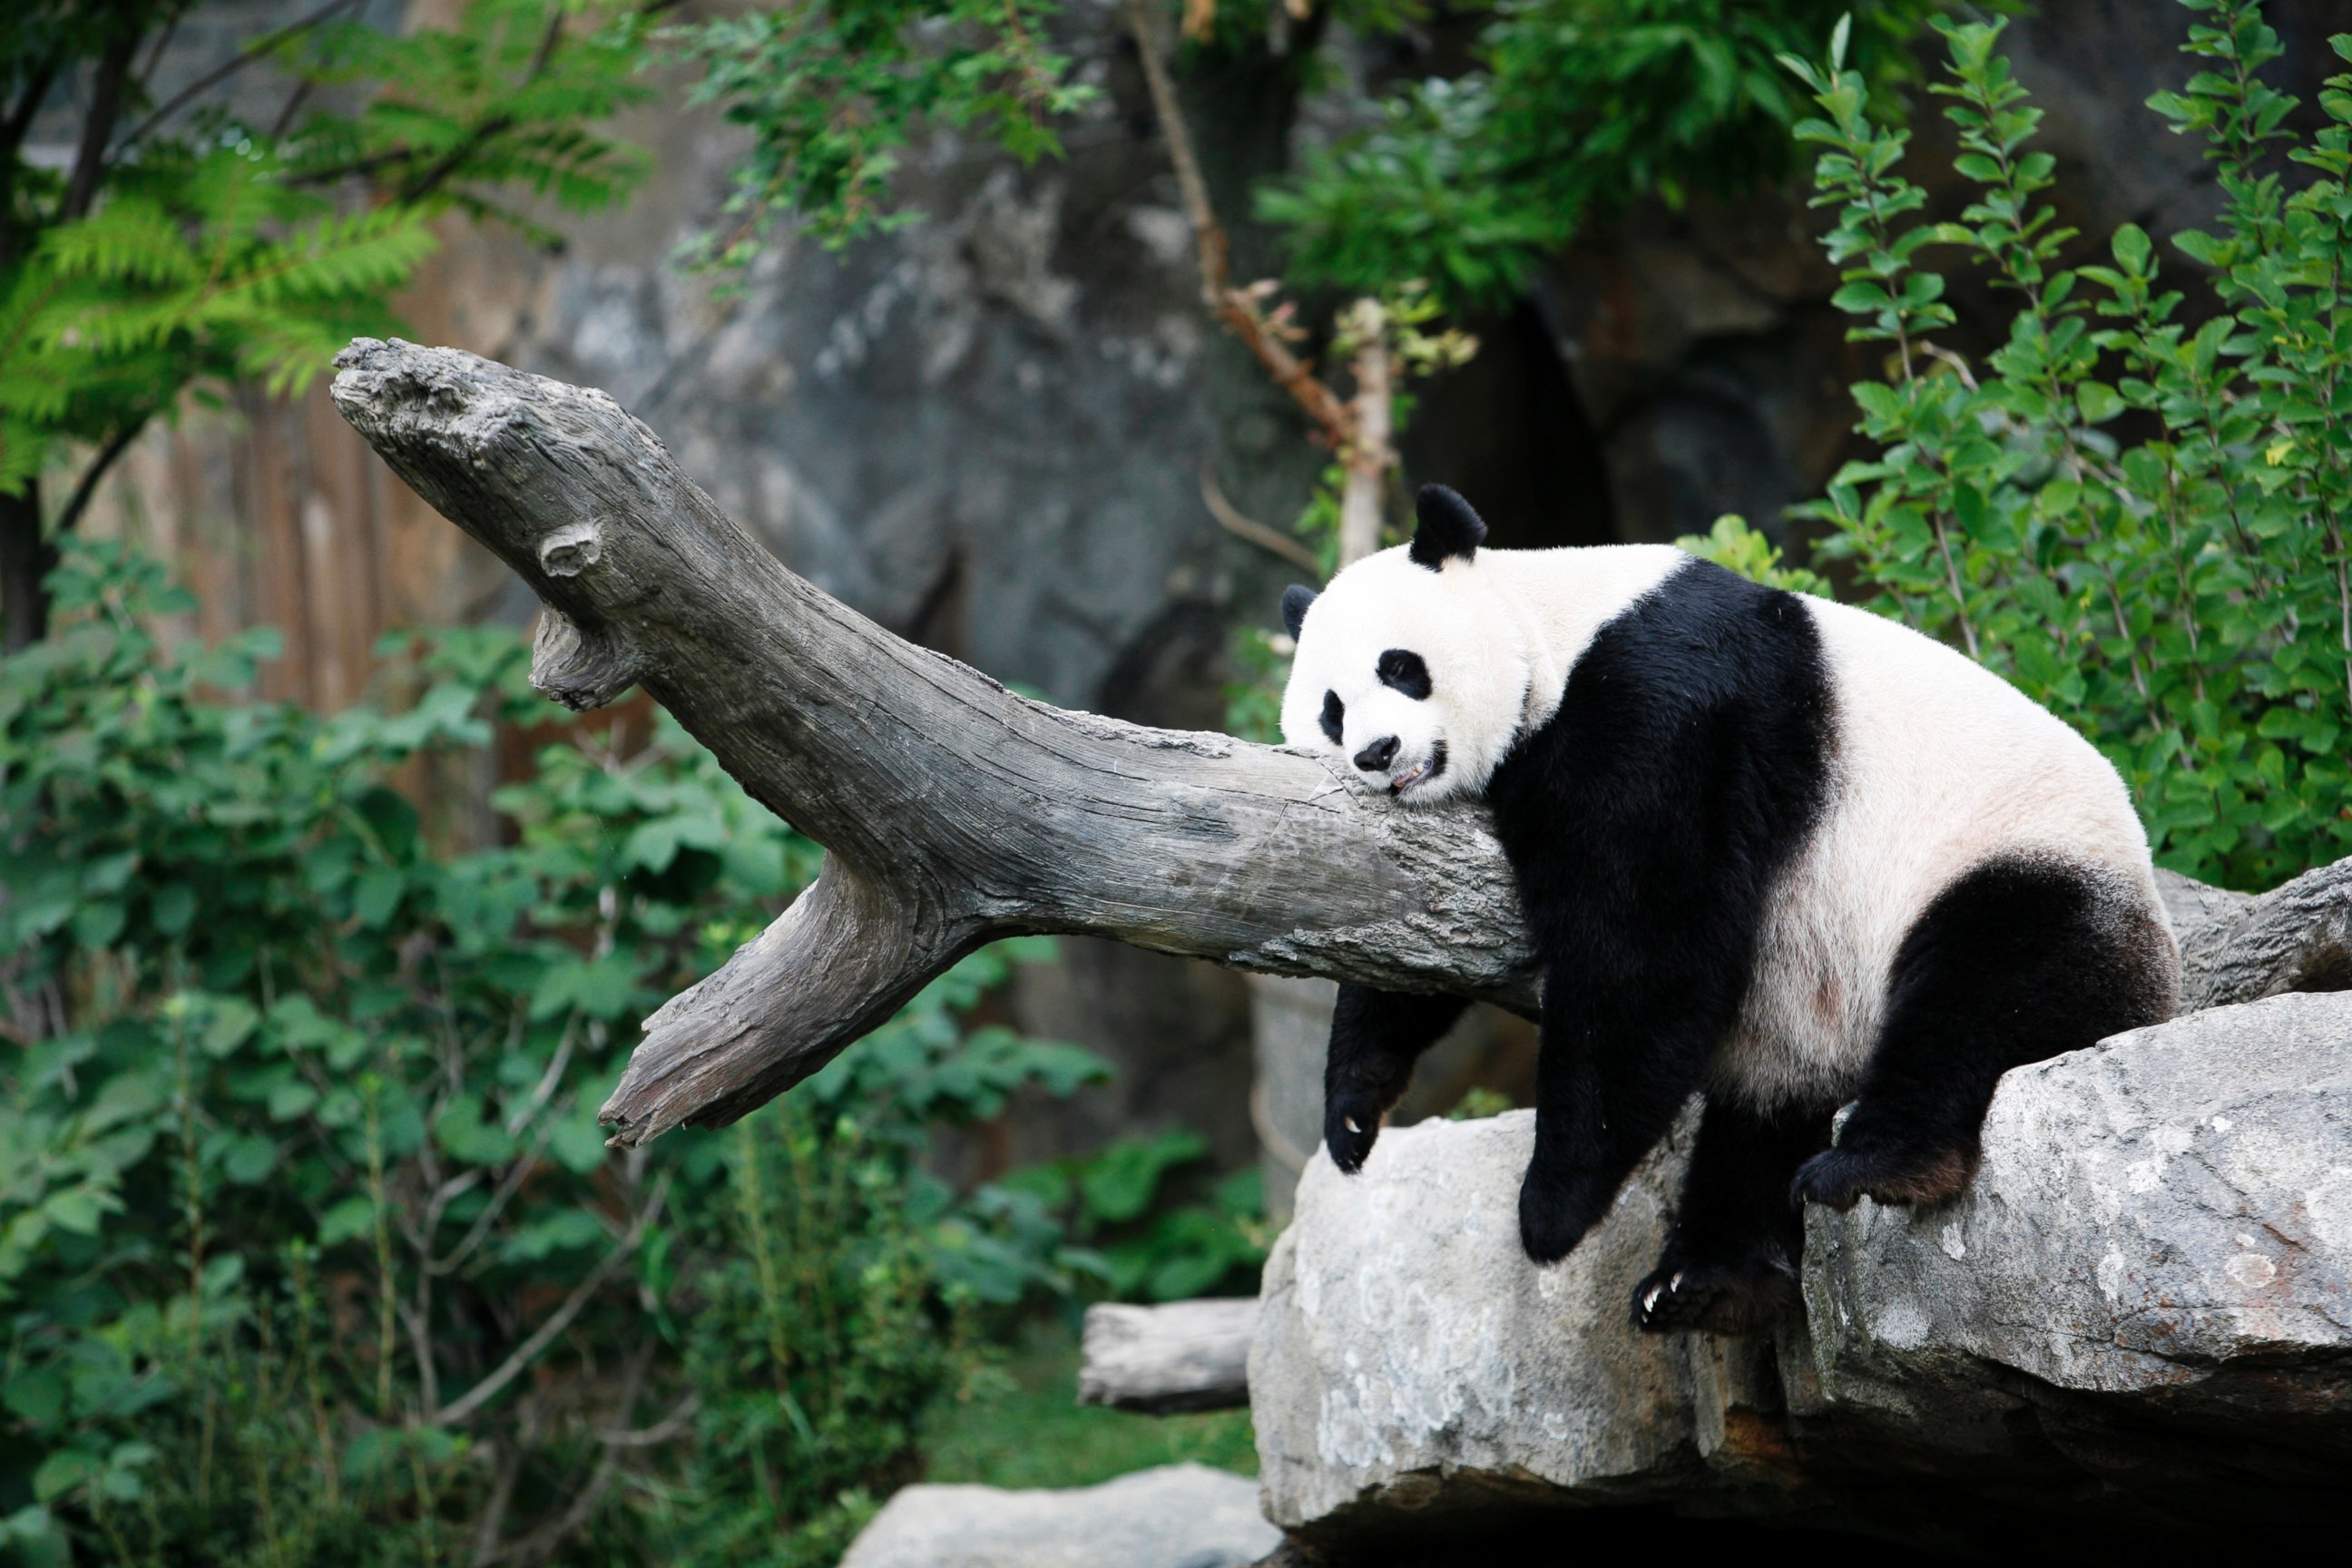 PHOTO: Giant panda Mei Xiang enjoys her afternoon nap at the National Zoo in Washington in this Aug. 23, 2007 file photo. 